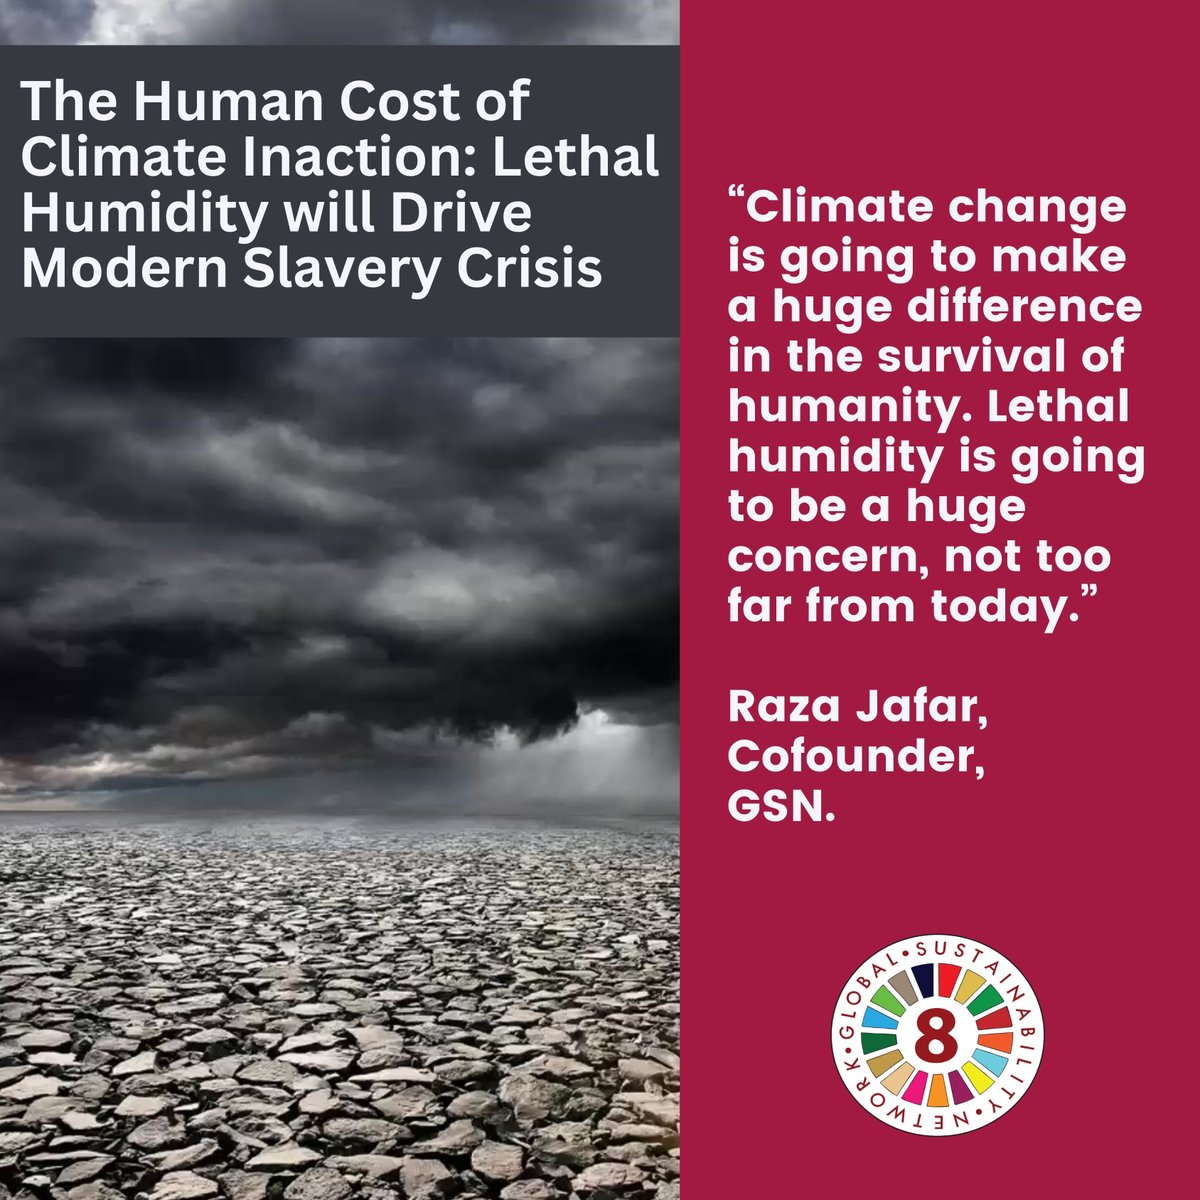 The link between climate change and modern slavery is undeniable. Climate change is not just about rising temperatures; it's also about the escalation of human suffering and exploitation. This crisis fuels forced labor, human trafficking, and modern slavery. #EndSlavery #Act4SDGs